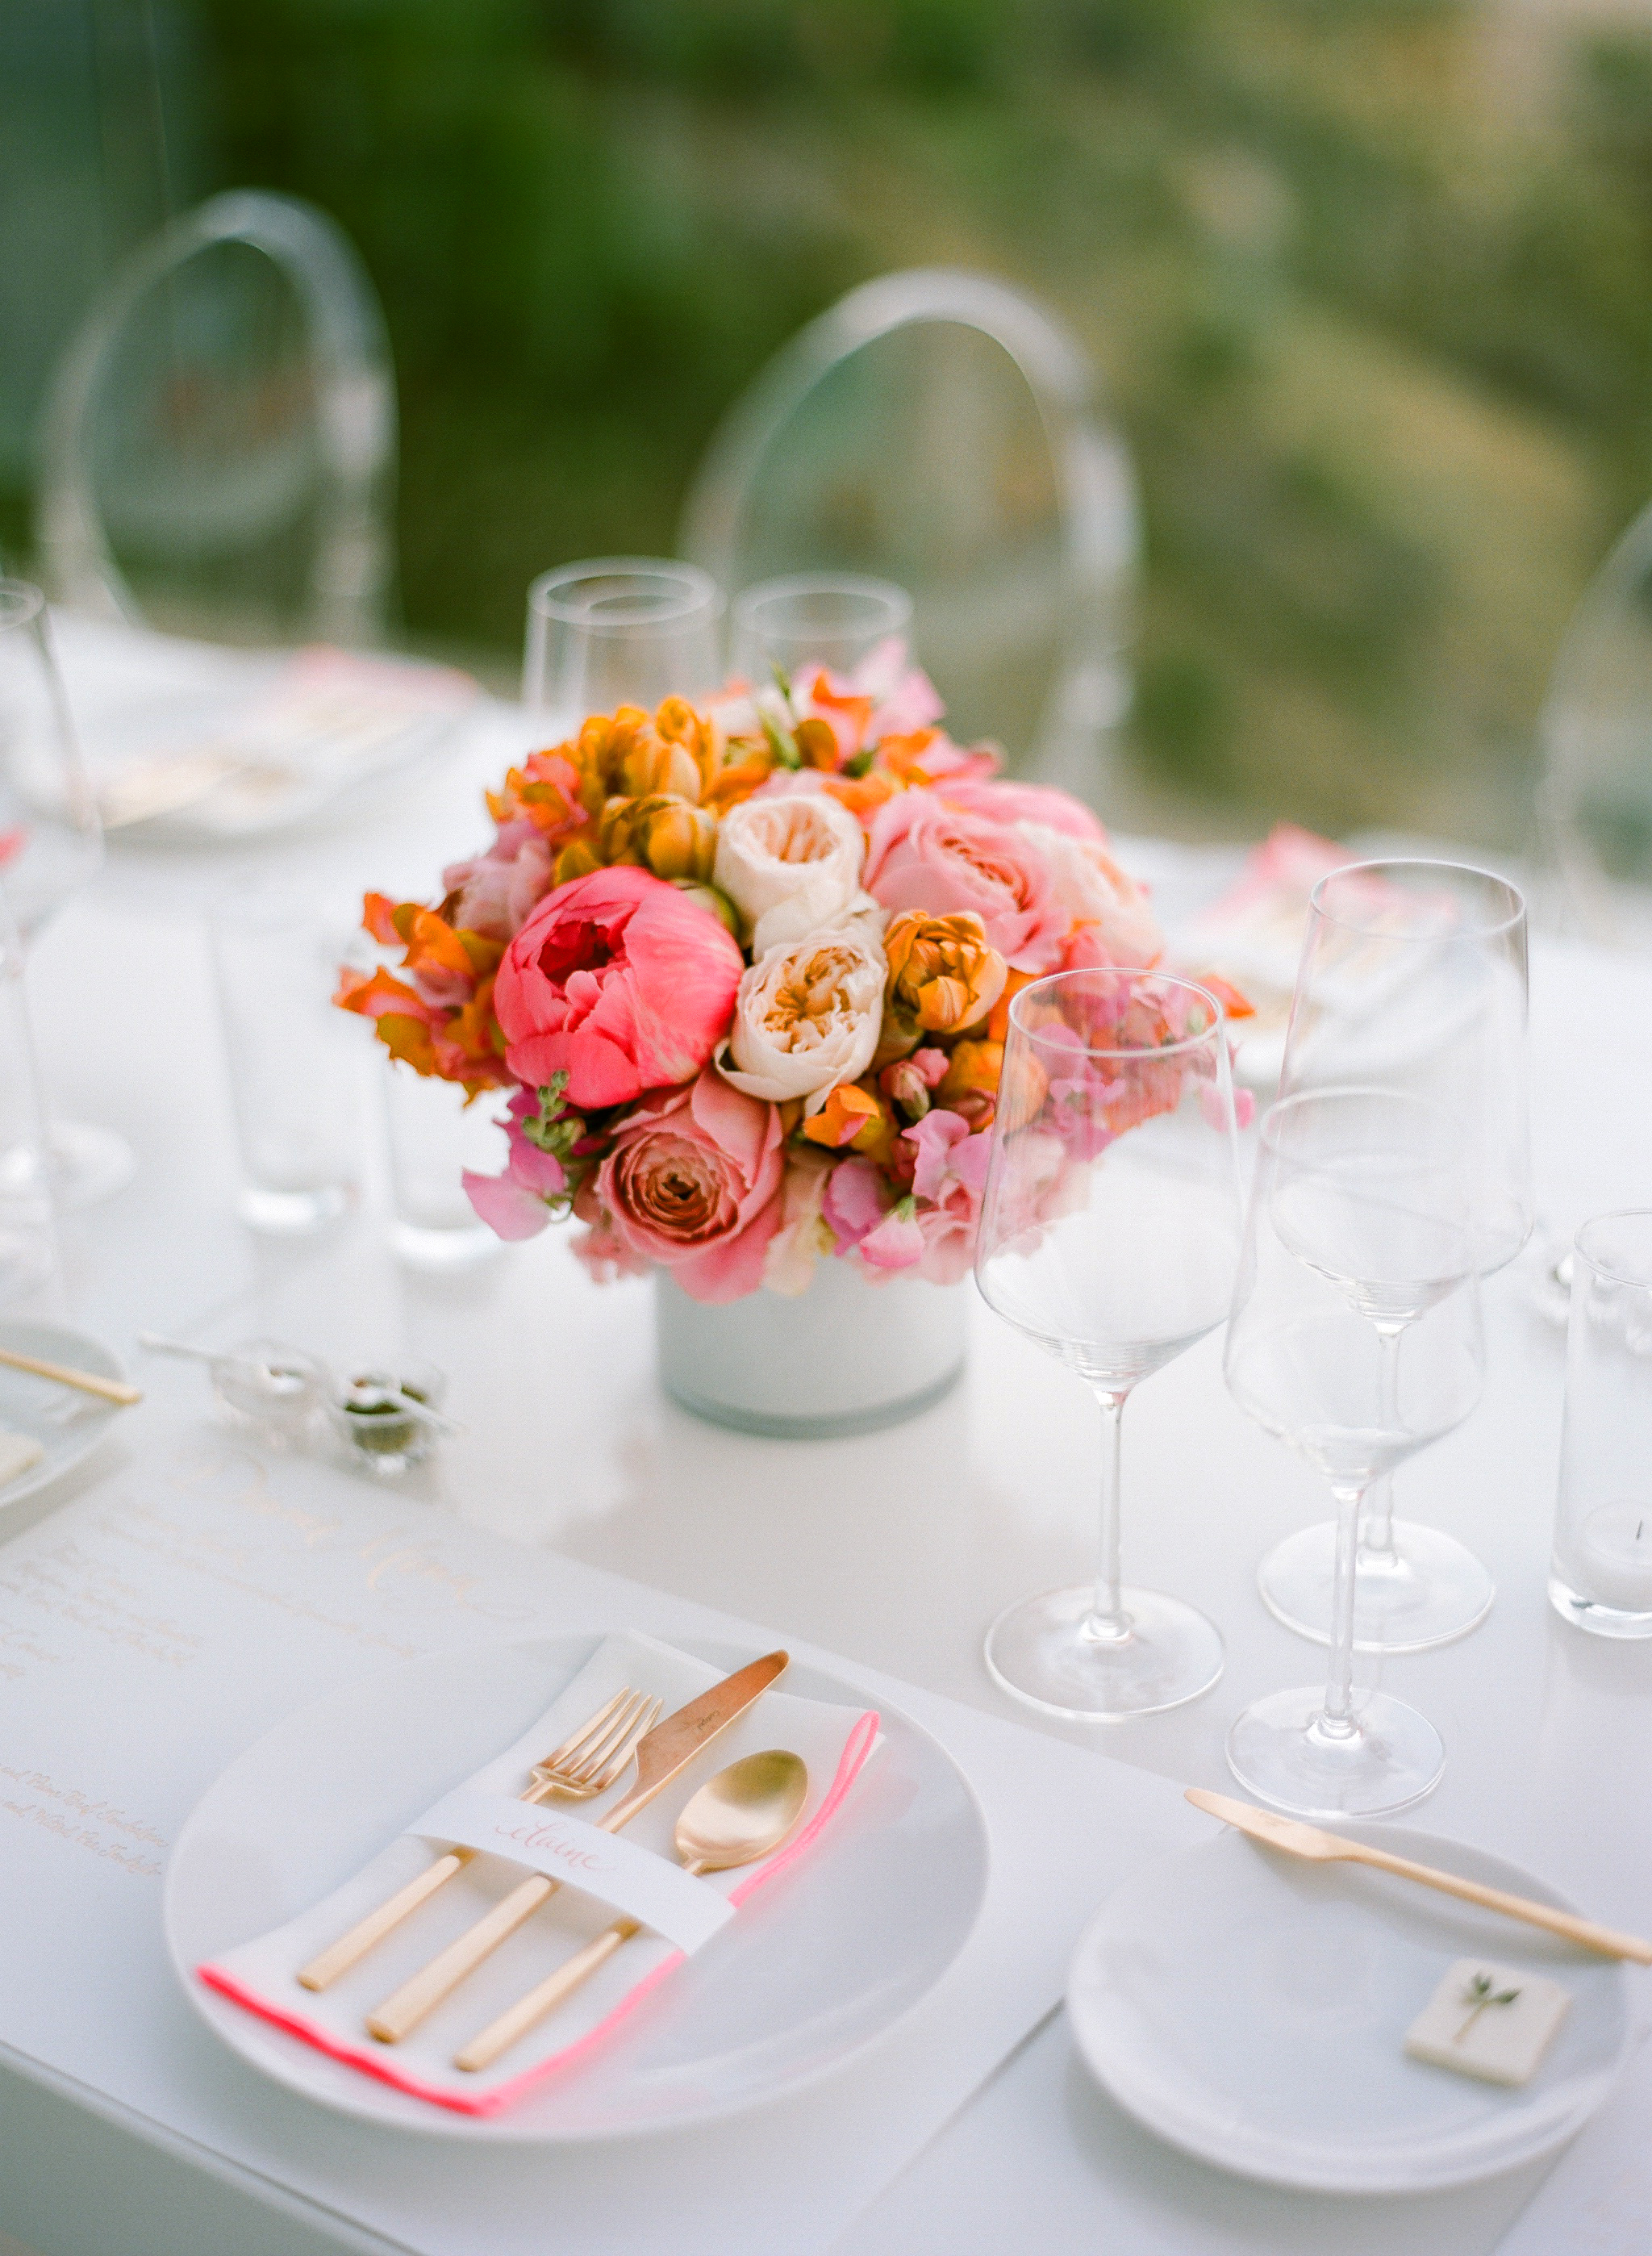 25 Bridal Shower Centerpieces the Bride-to-Be Will Love | Martha